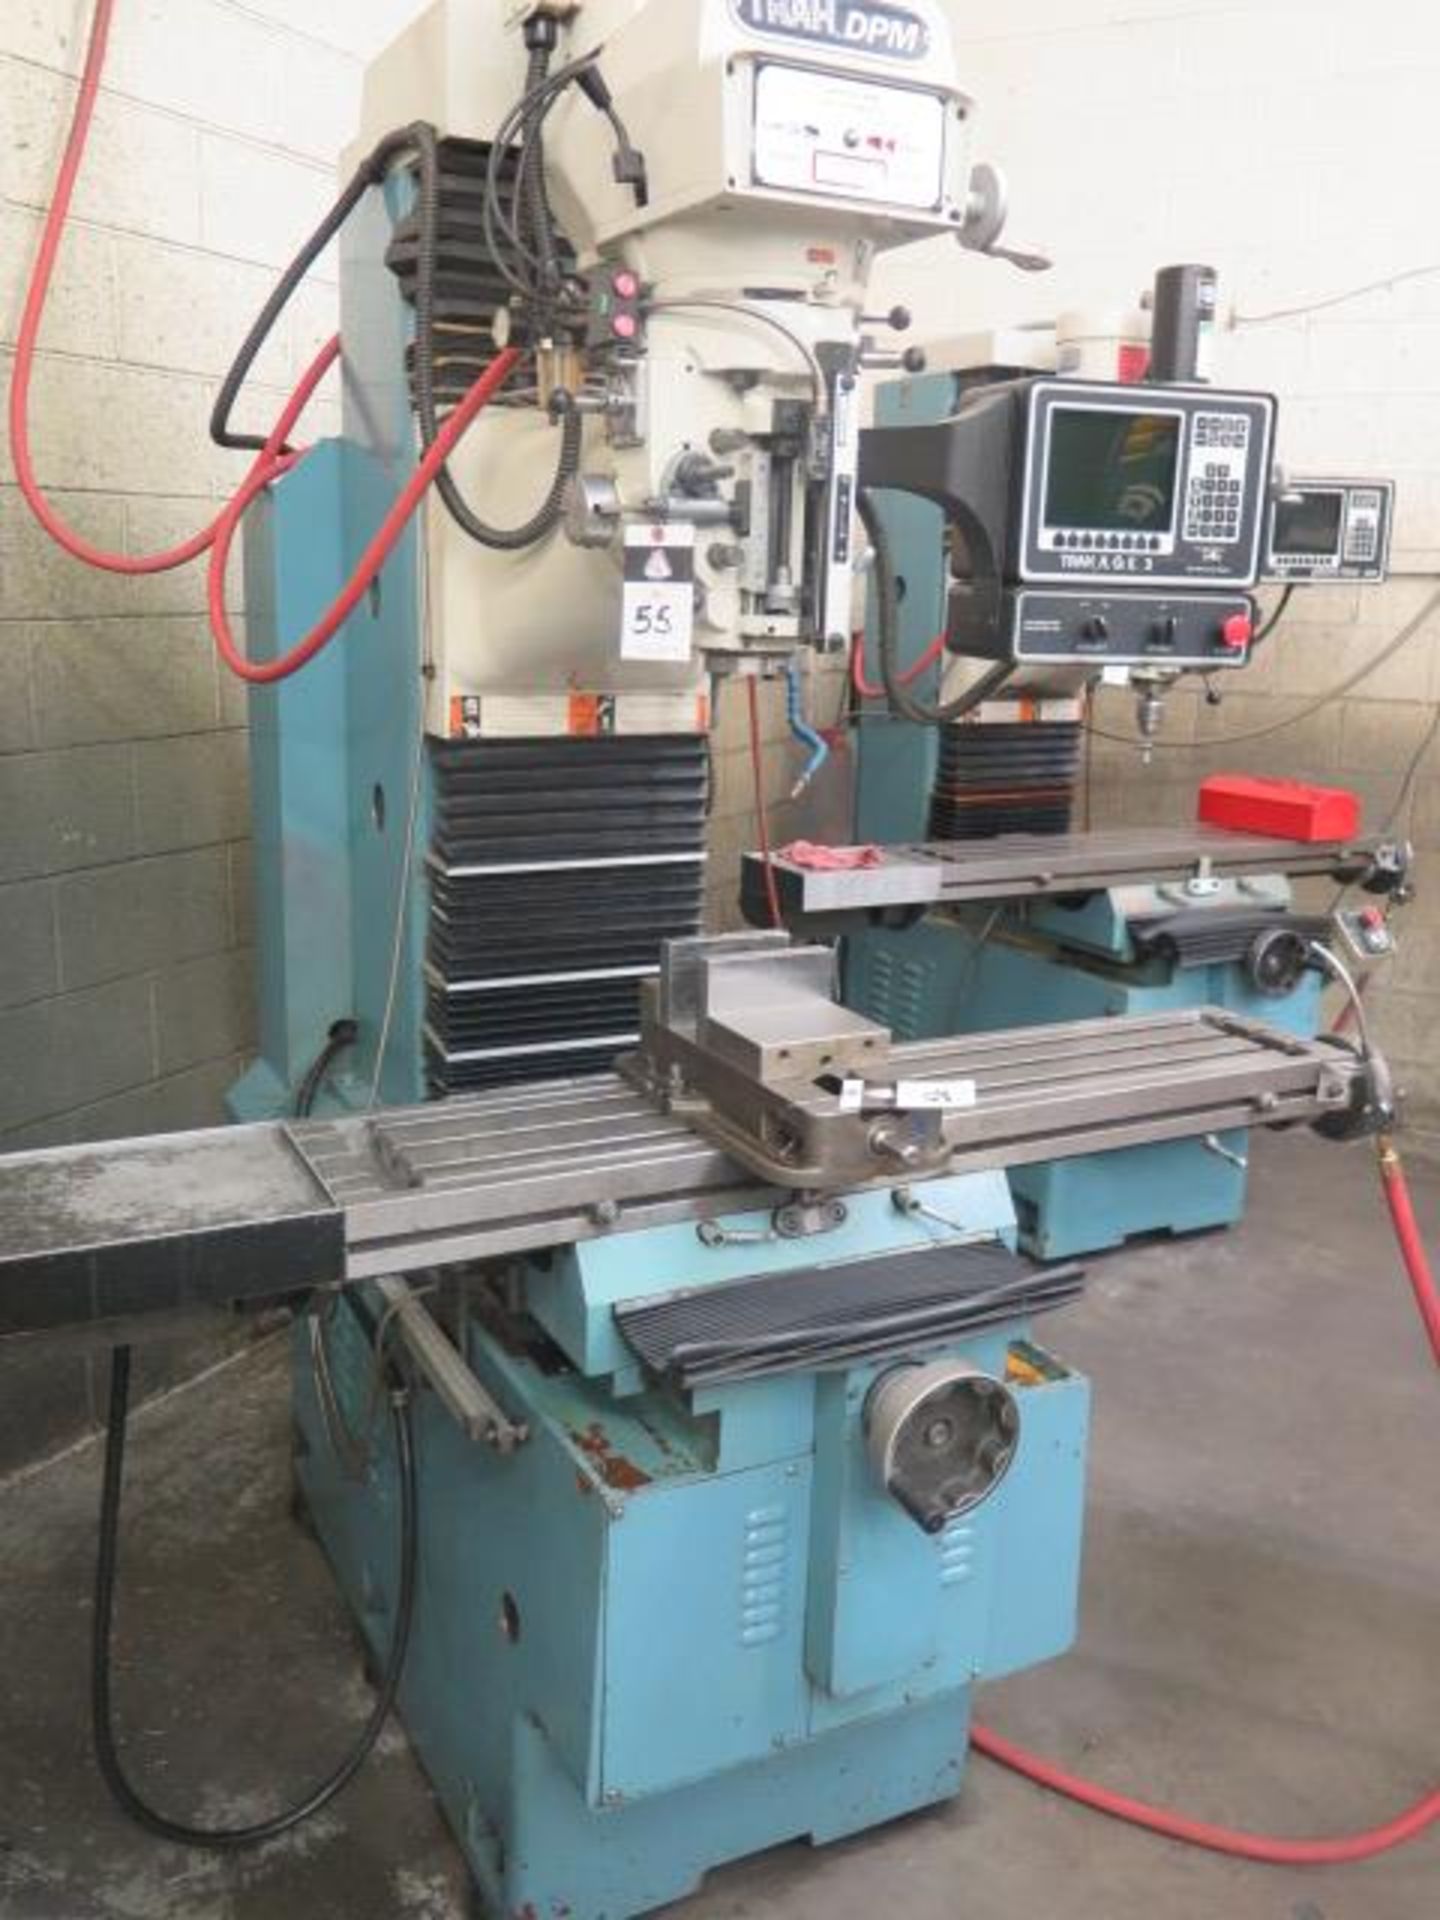 Southwestern Industries TRAK-DPM CNC Mill s/n 97-3095 w/ Proto Trak A.G.E 3 Controls, 3Hp,SOLD AS IS - Image 3 of 15